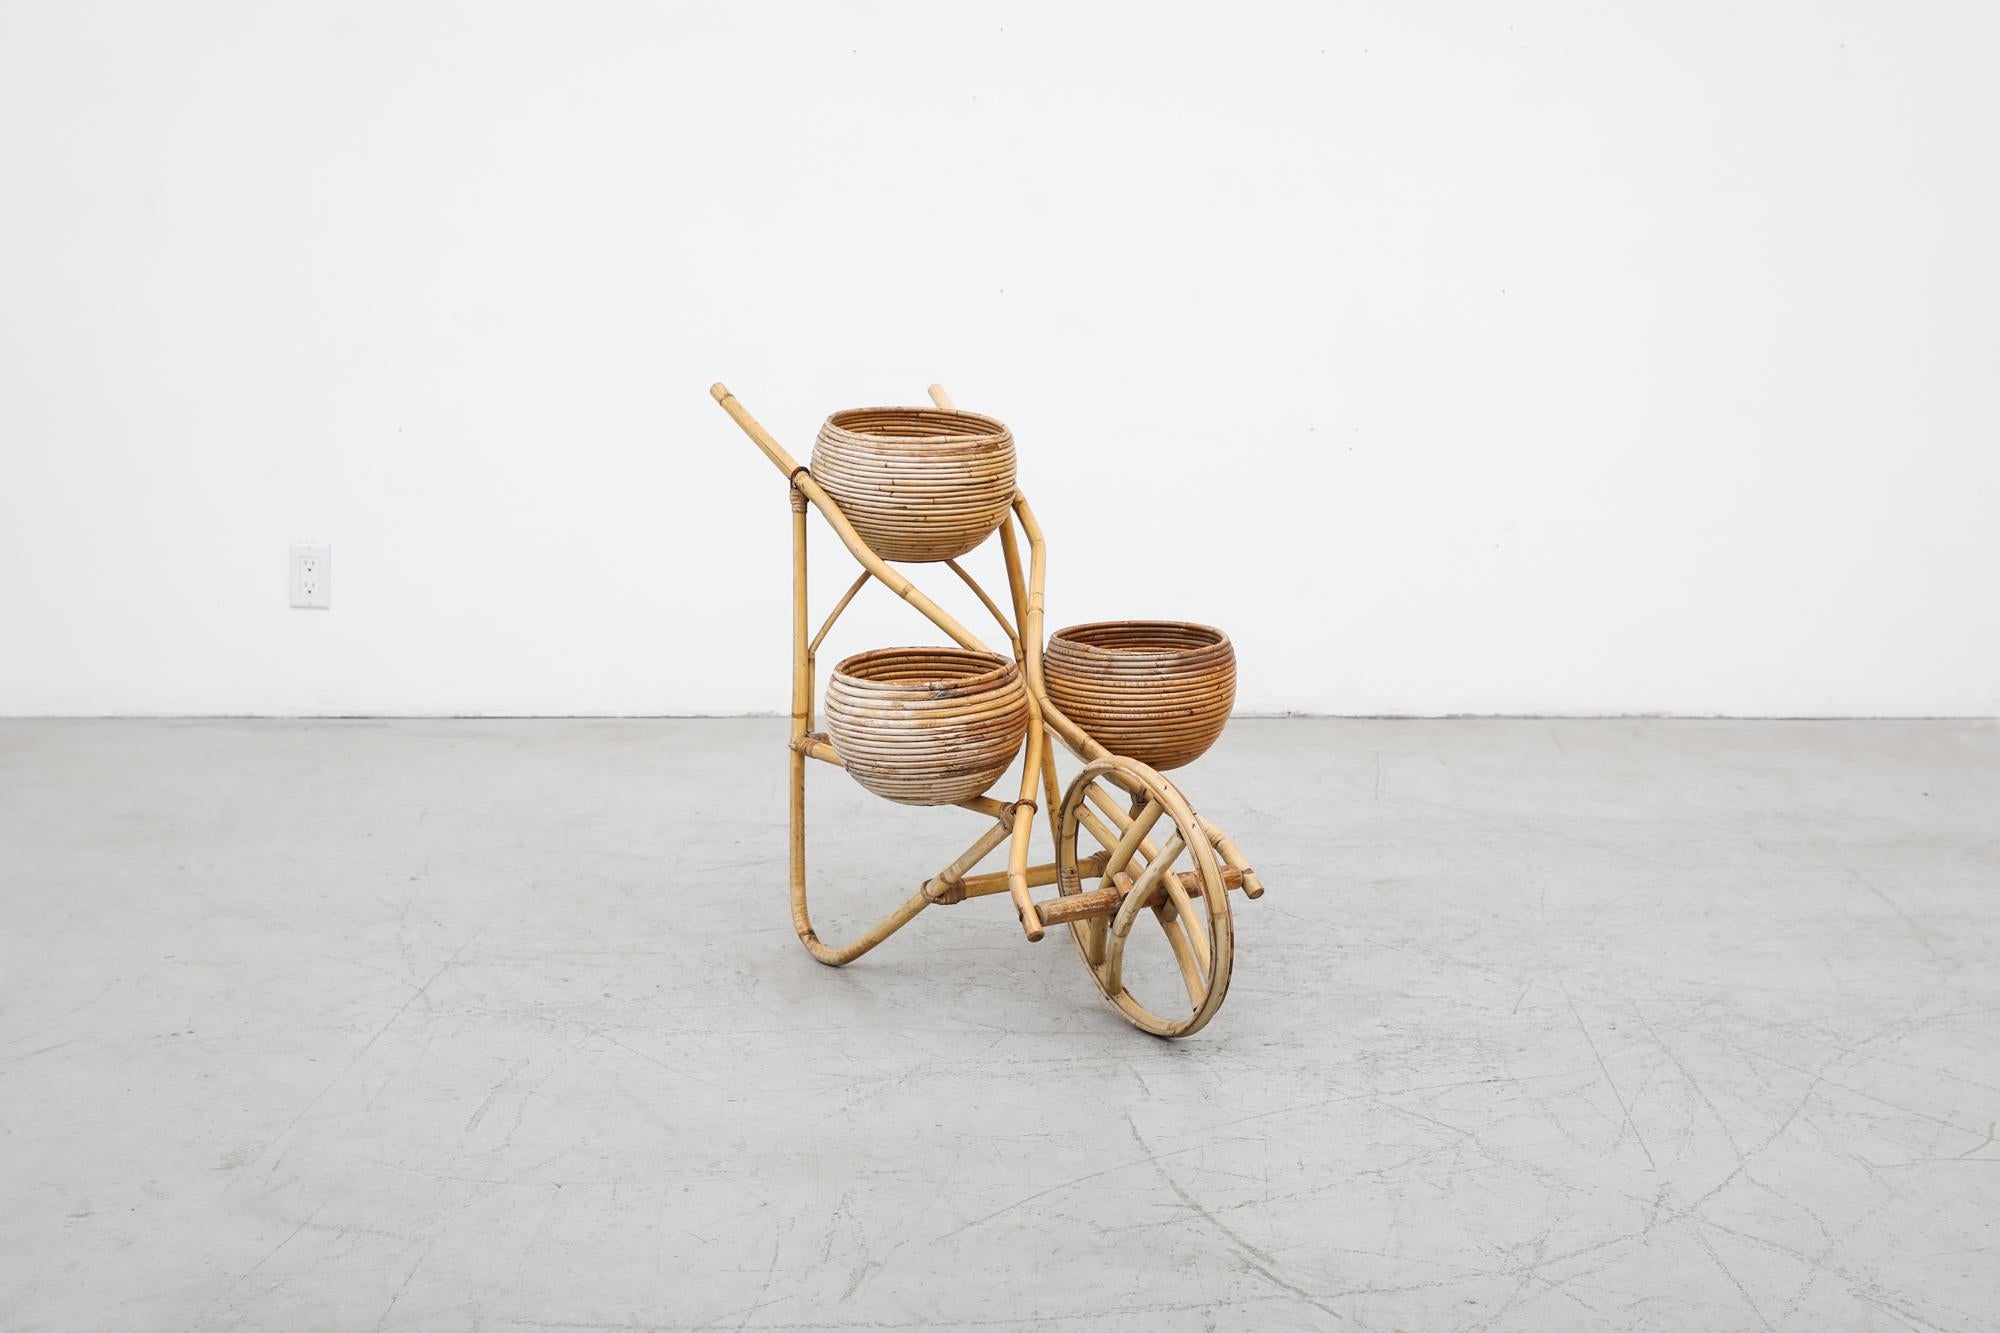 Charming, Vittorio Bonacina (attr), 1950's bamboo wheelbarrow with three planter baskets and one front wheel. In original condition with visible wear, including sun fading on one side, water marks and scratches. No structural damage. Wear is